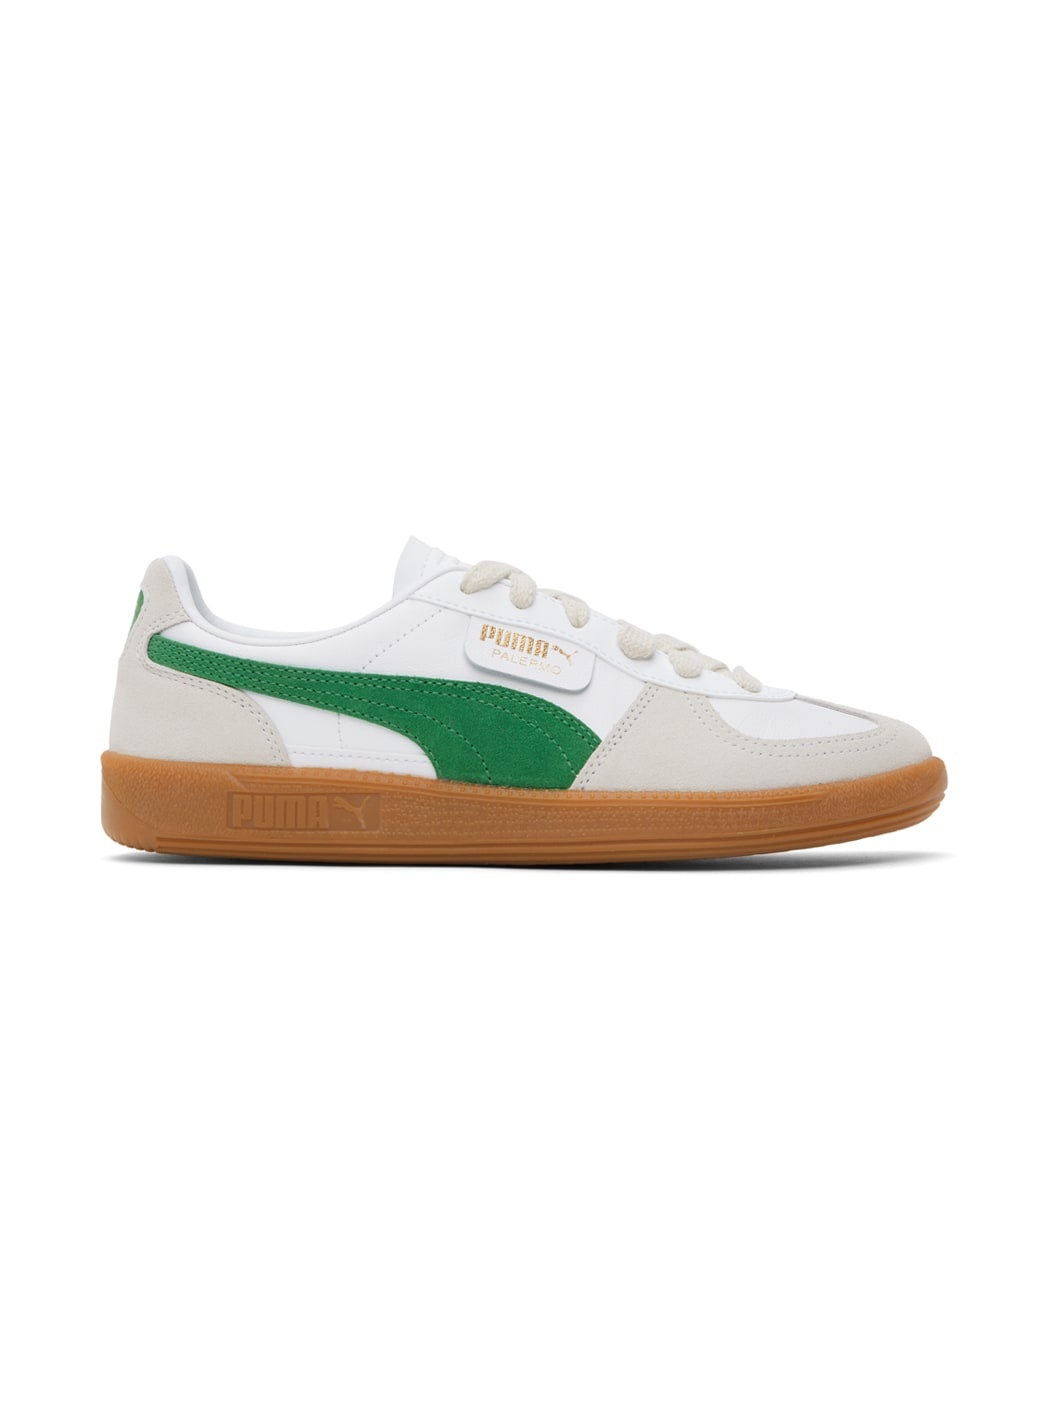 Off-White & Green Palermo Leather Sneakers - 1